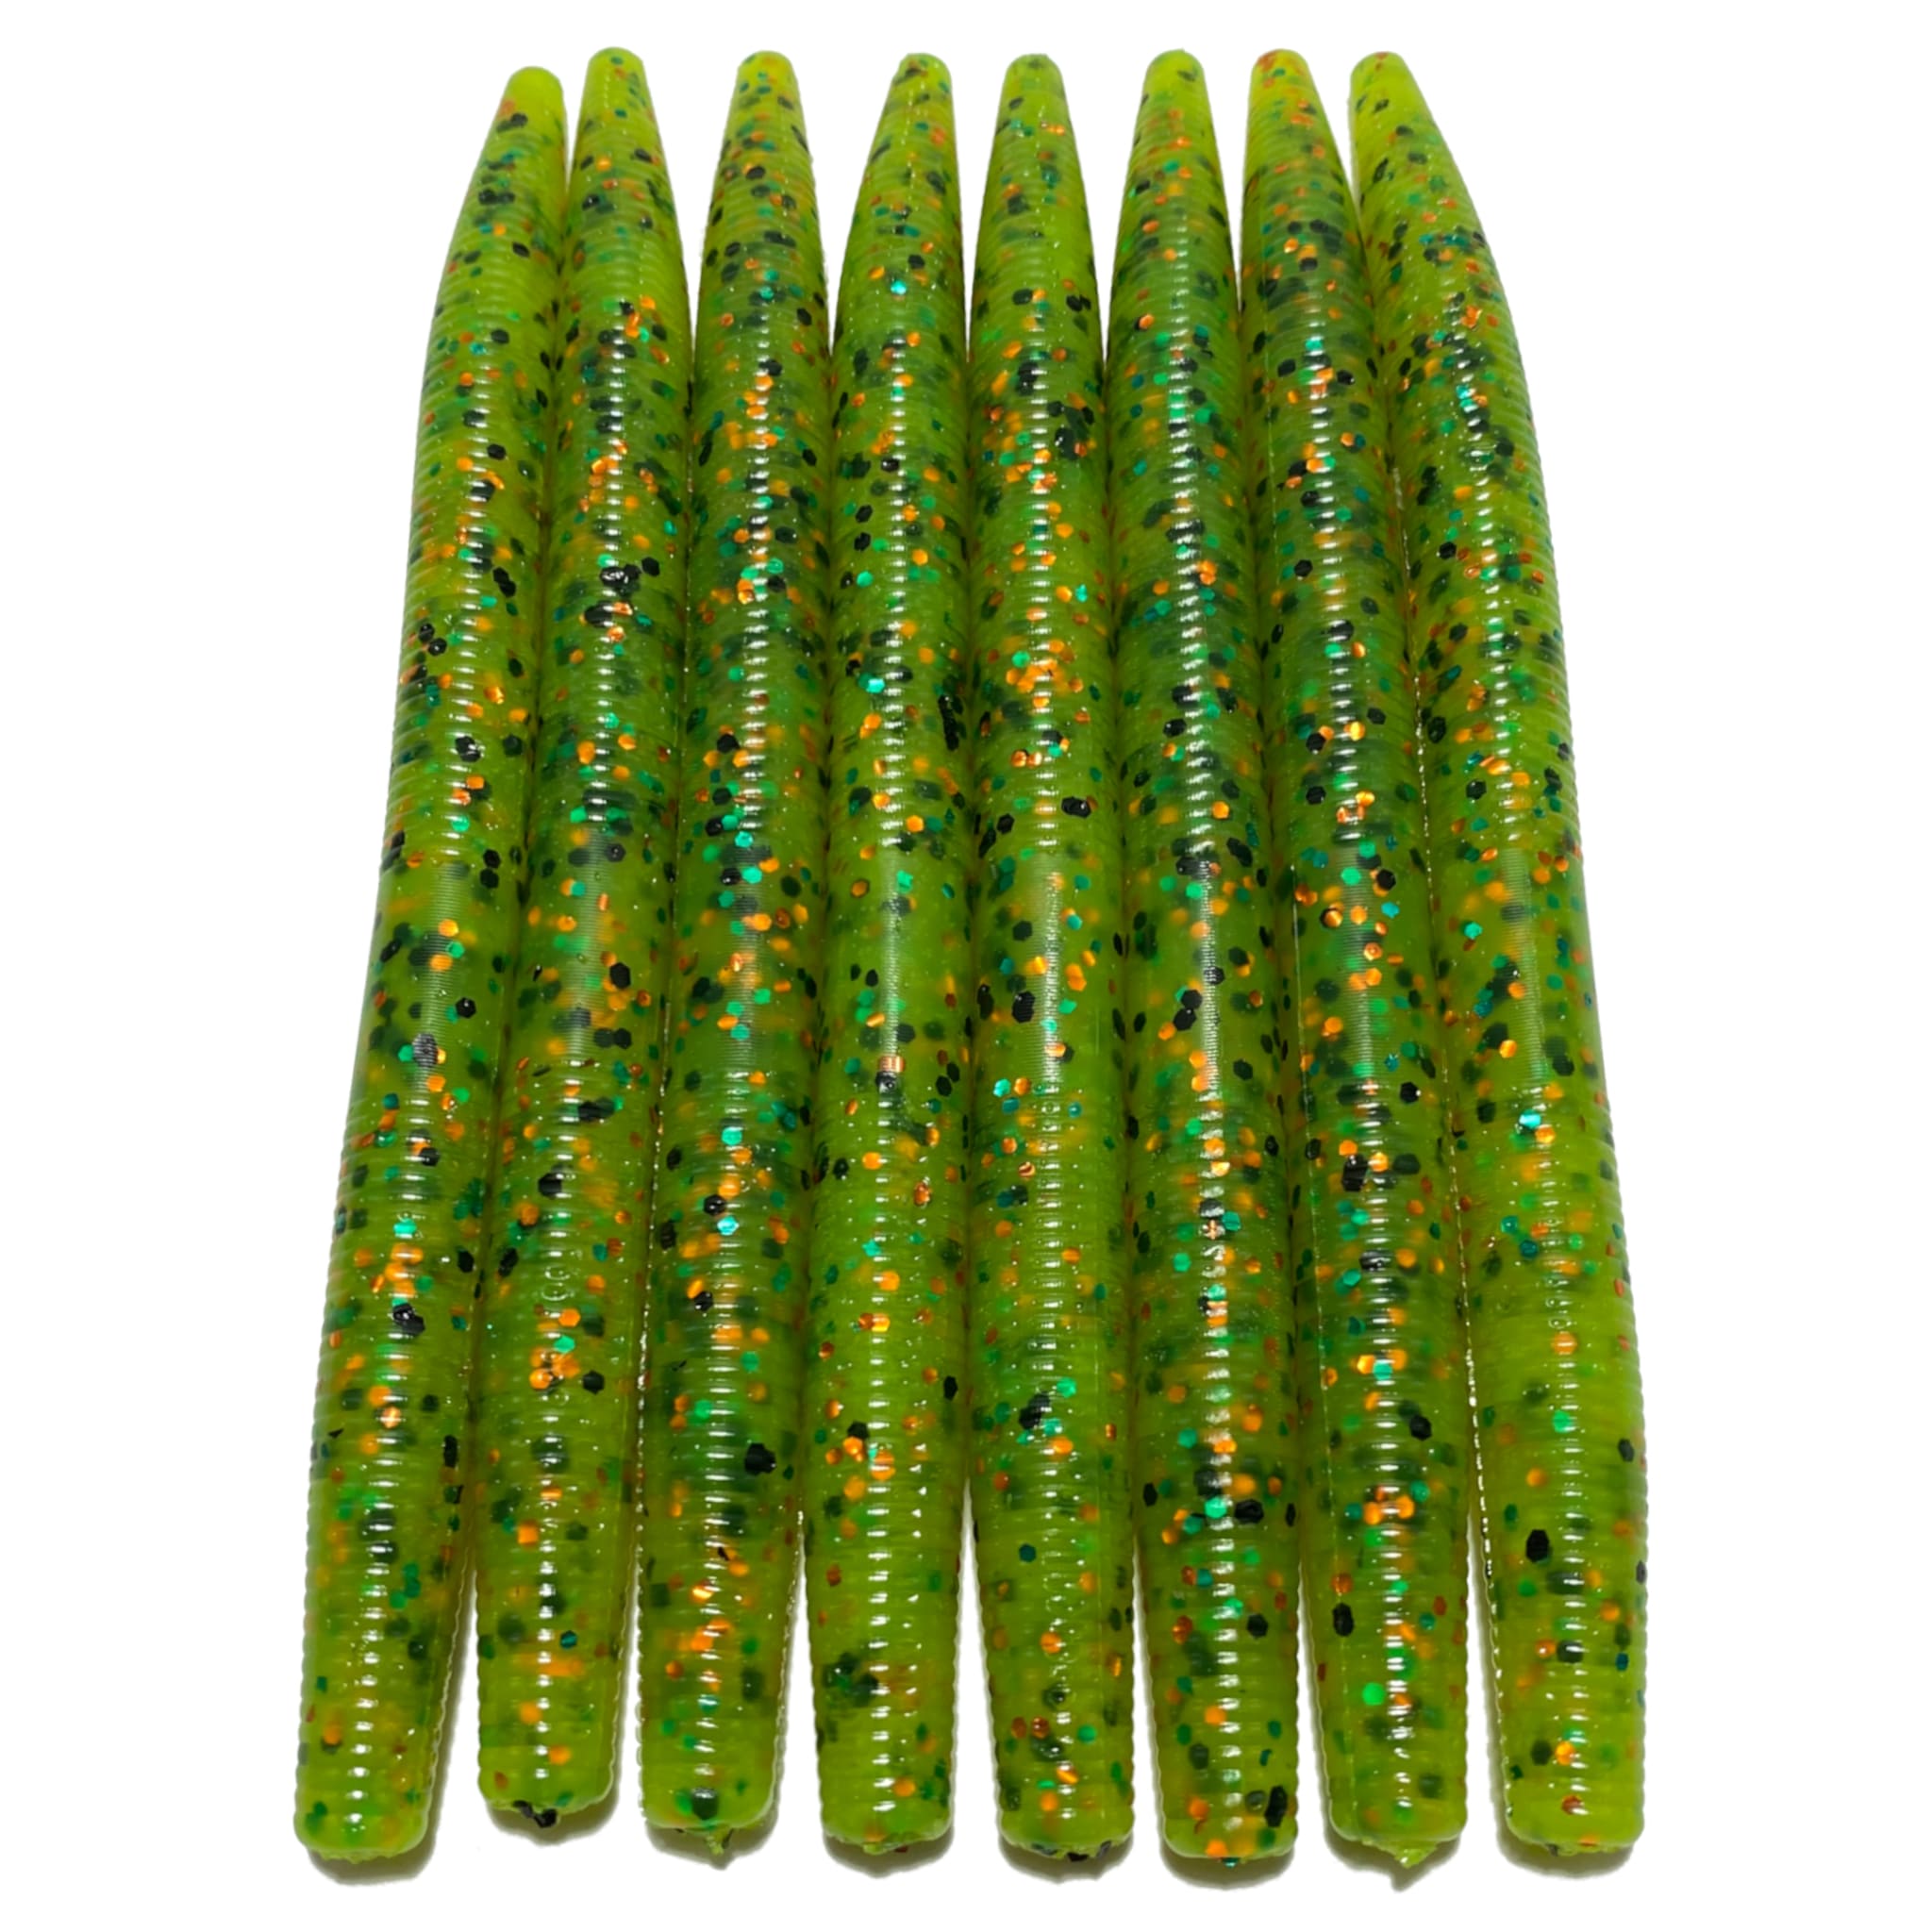 Obee 5 Stick Worm - Firetiger Chartreuse – Obee Fishing Co.